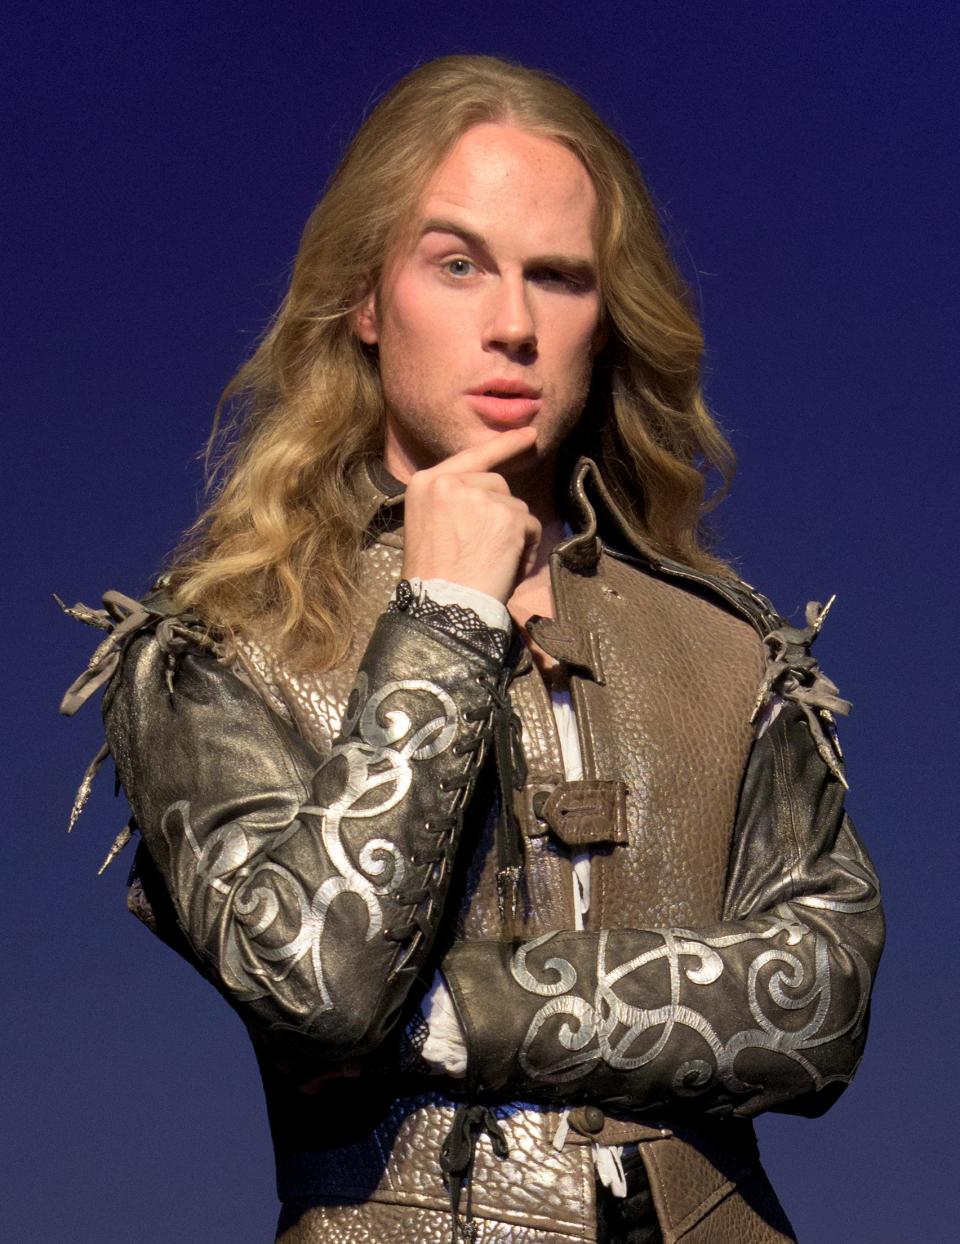 Charlie Tingen plays William Shakespeare in the musical “Something Rotten” at Florida Studio Theatre.